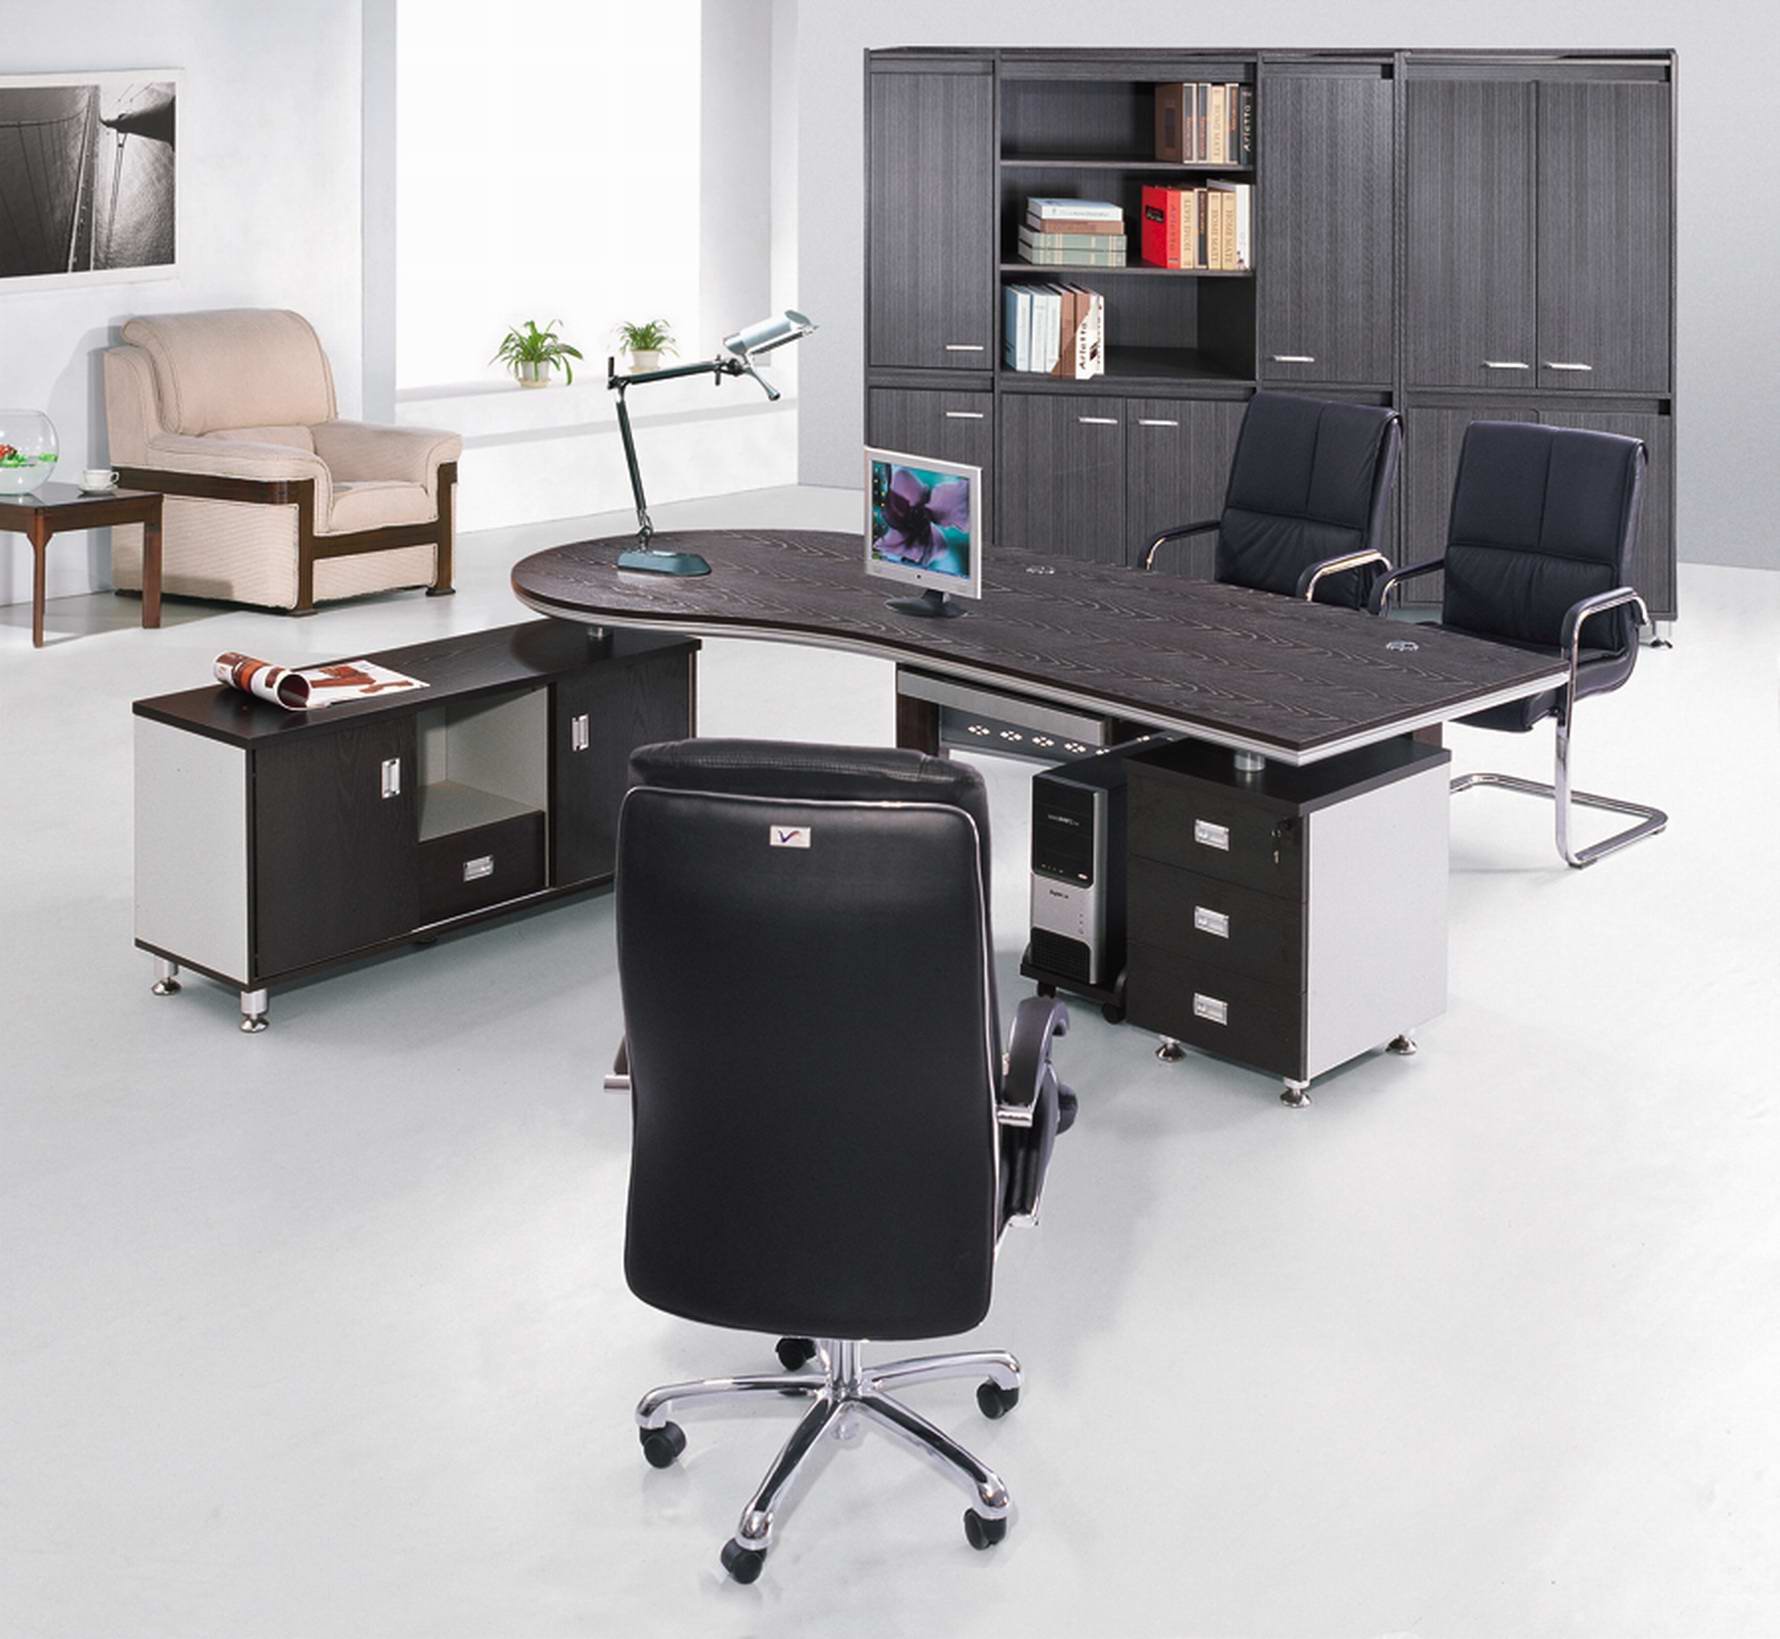 Better Deal On Office Furniture The Office Furniture Store